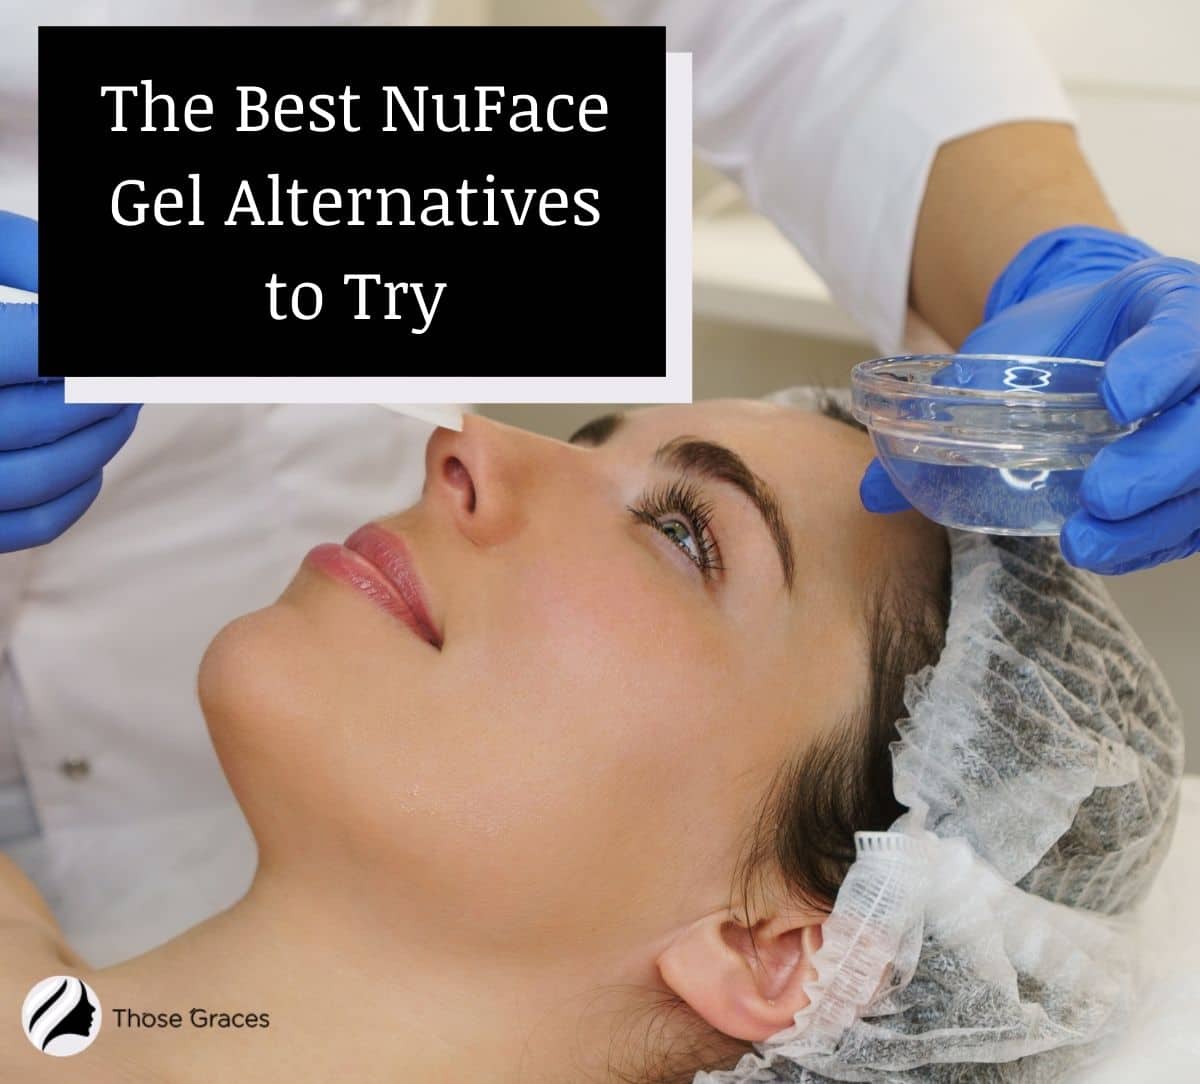 assistant putting on some nuface gel alternatives to the woman's face